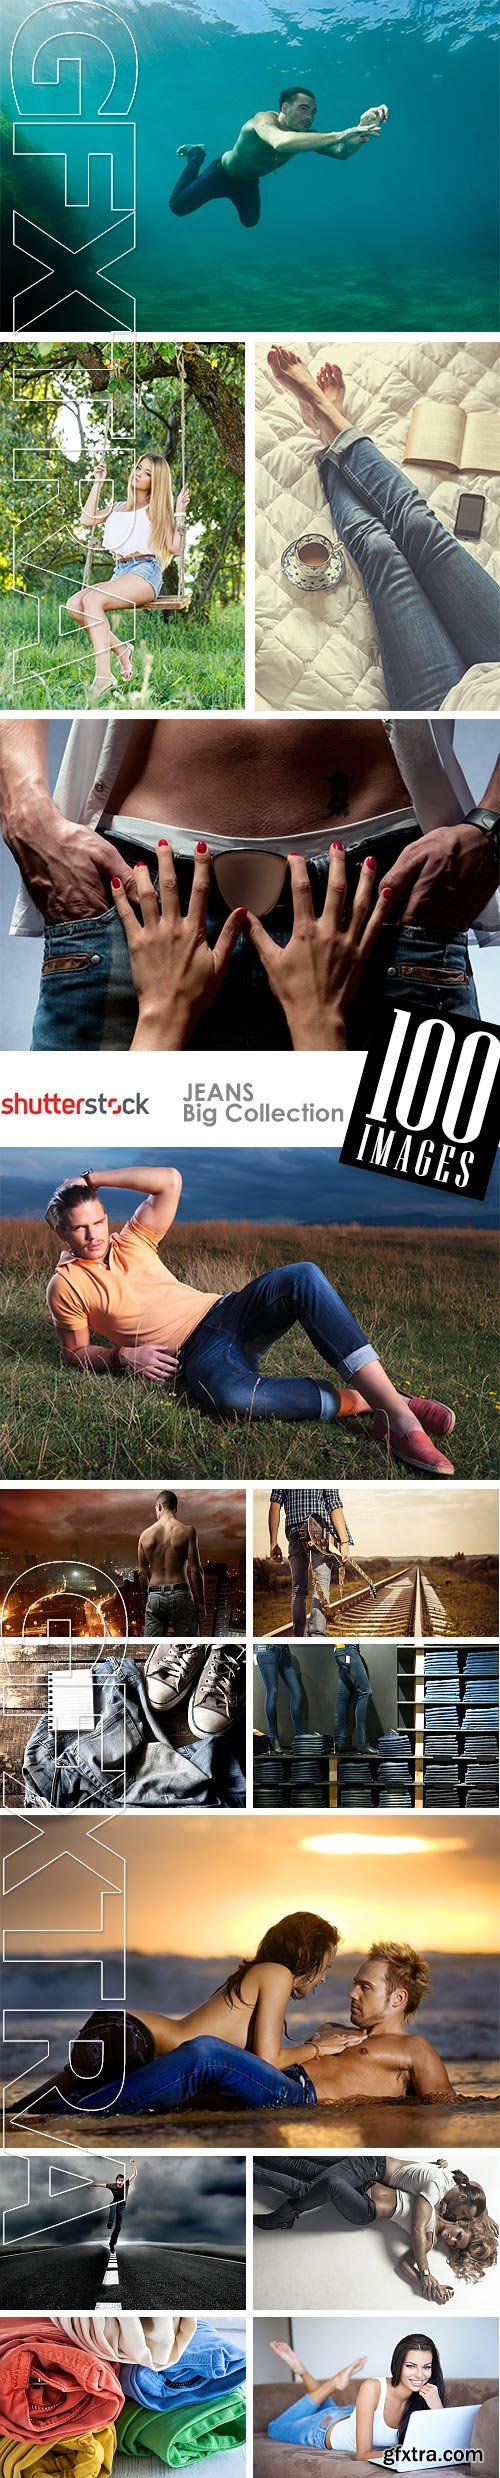 JEANS Big Collection 100xJPG